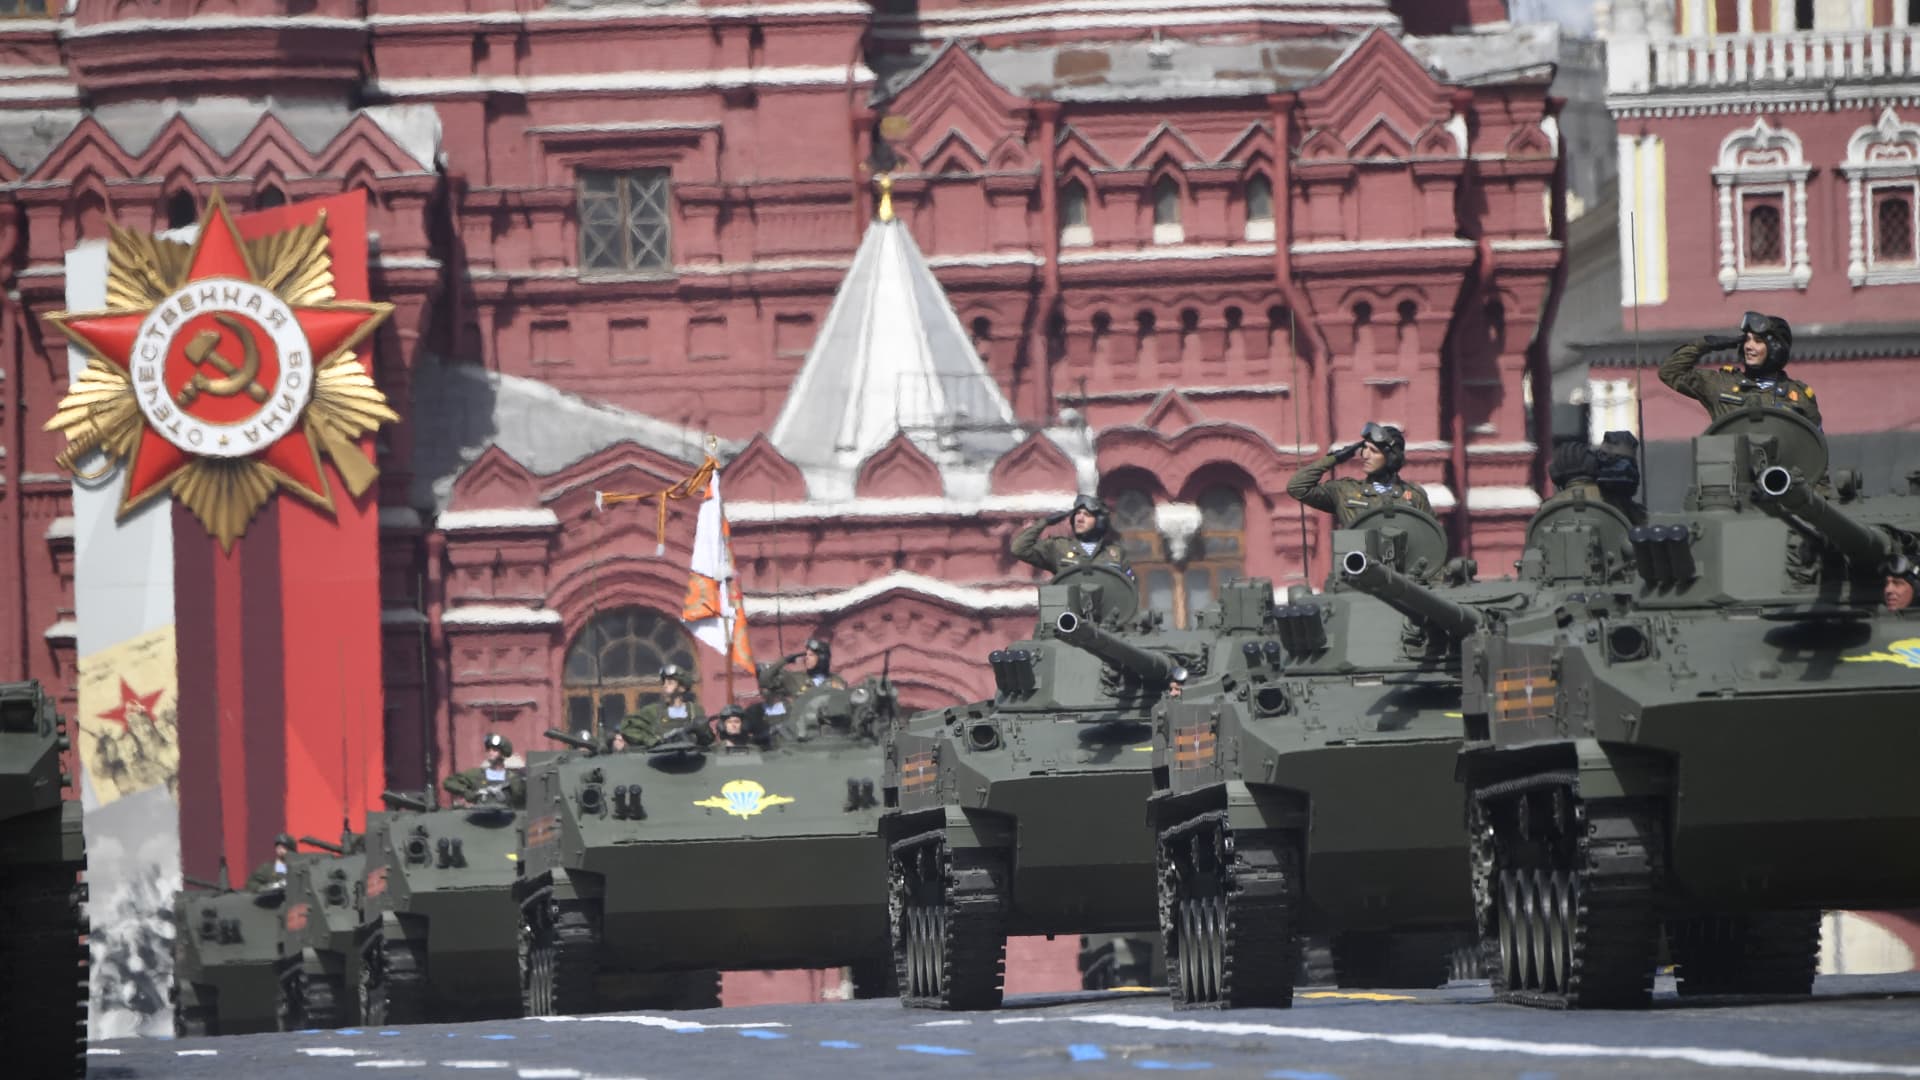 Russian servicemen ride military vehicles during the Victory Day military parade at Red Square in central Moscow on May 9, 2022. - Russia celebrates the 77th anniversary of the victory over Nazi Germany during World War II. (Photo by Alexander NEMENOV / AFP) (Photo by ALEXANDER NEMENOV/AFP via Getty Images)